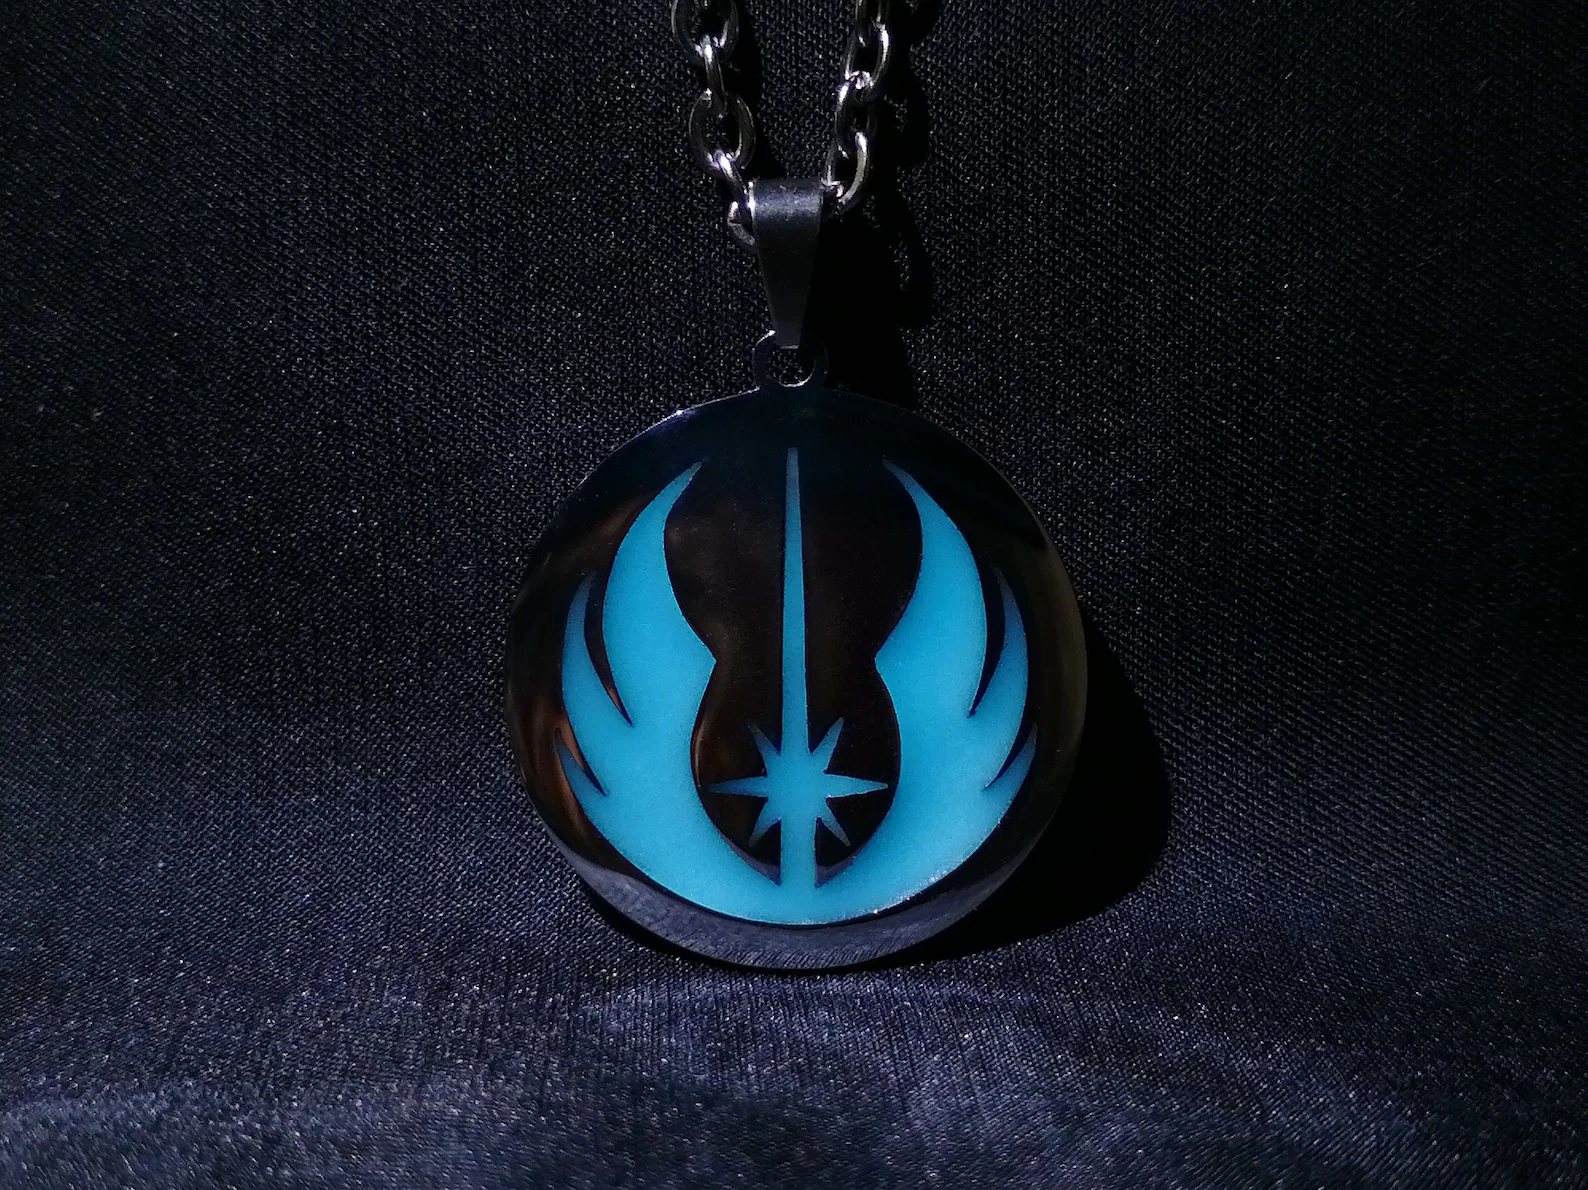 Black necklace with a blue jedi symbol on the charm